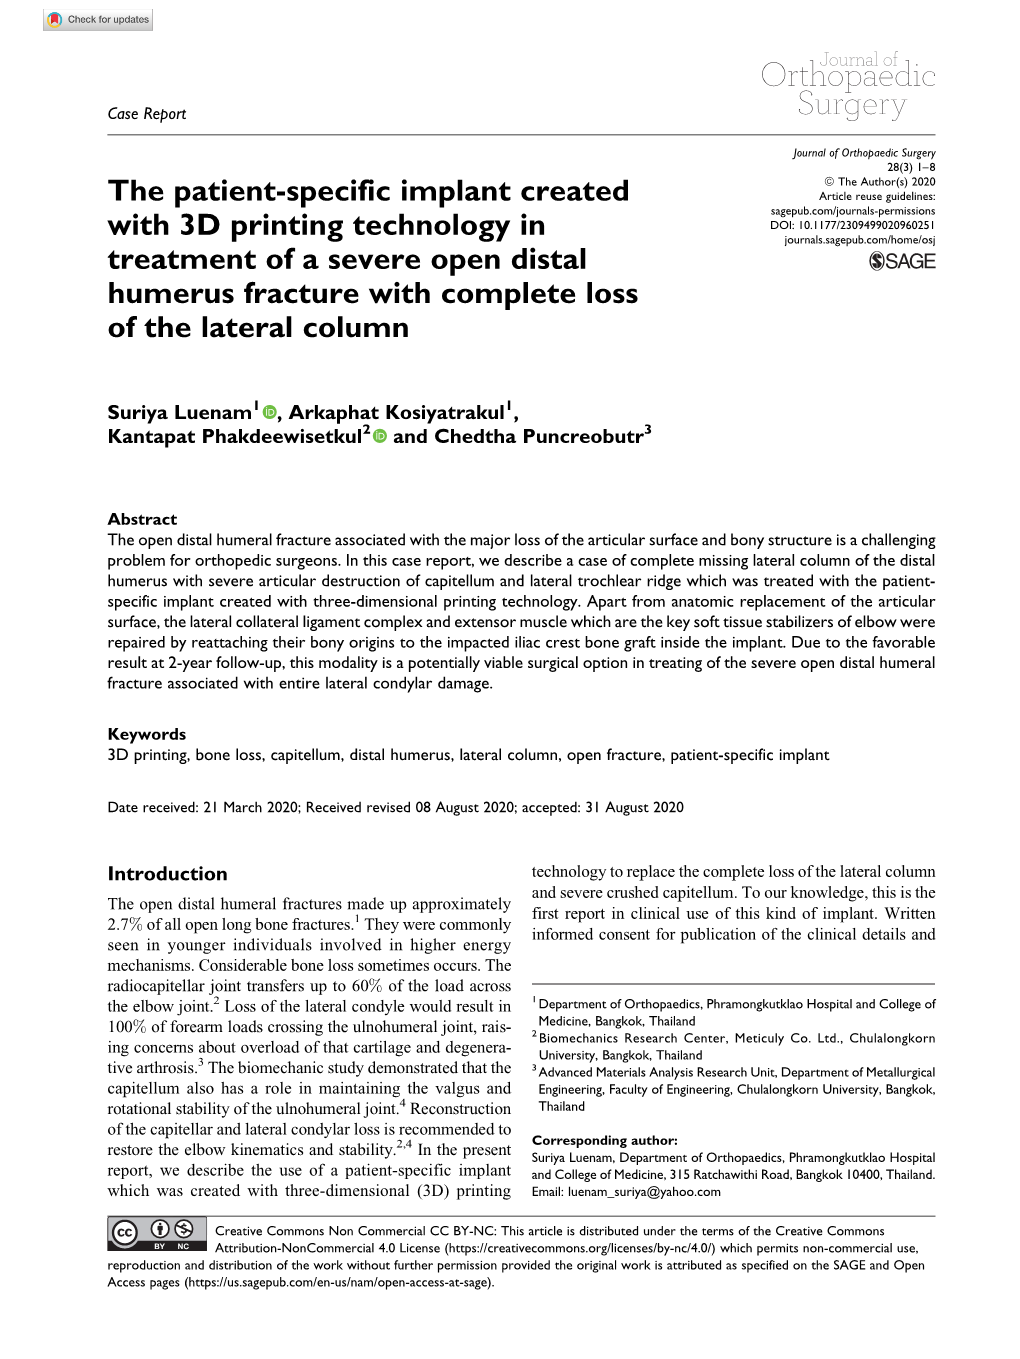 The Patient-Specific Implant Created with 3D Printing Technology in Treatment of a Severe Open Distal Humerus Fracture with Comp